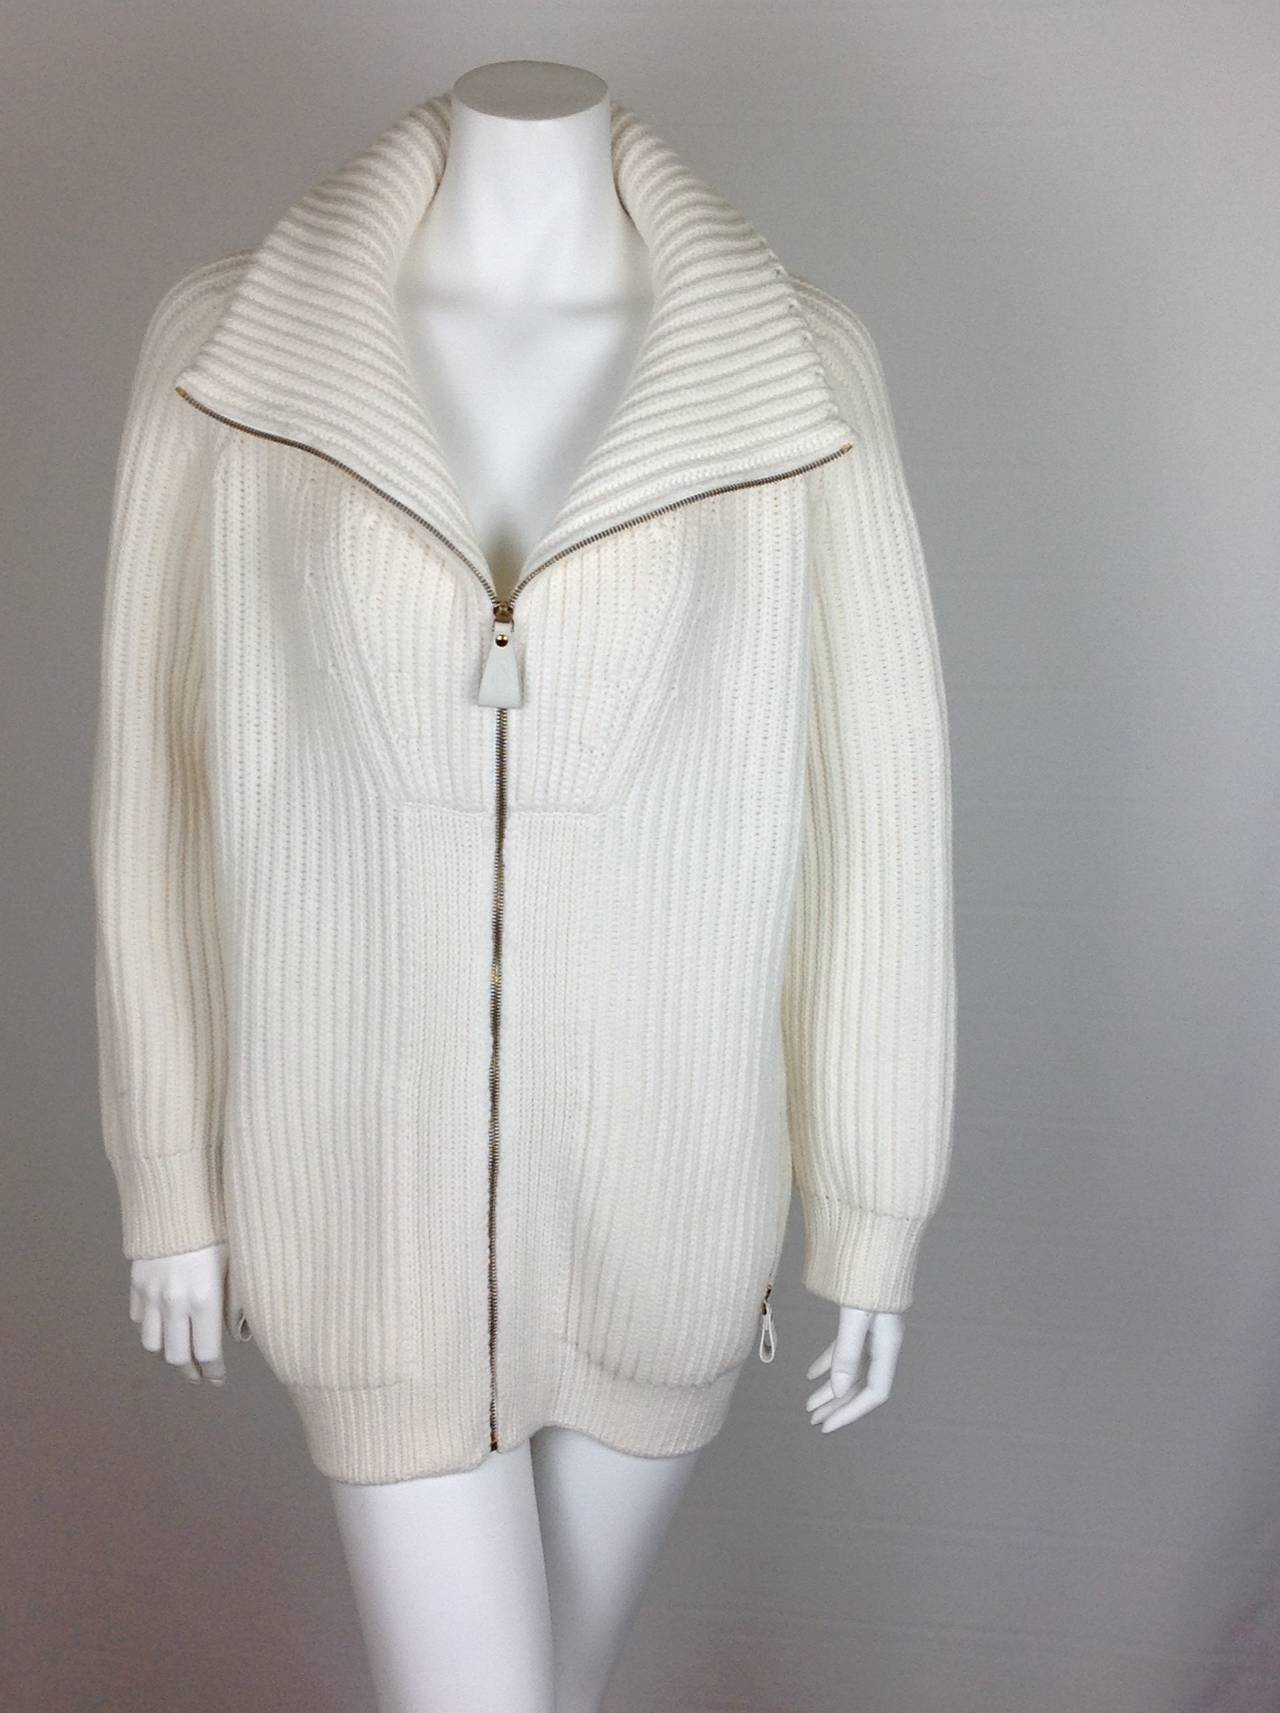 Looks and feels like a snowball - winter white Hermes zip cardigan jacket.
Can be worn as an outerwear piece.  Oversize fit, easily fits up to US 10.
80% virgin wool, 20% cashmere blend - deliciously soft. Ribbed knit. Bib front.
29